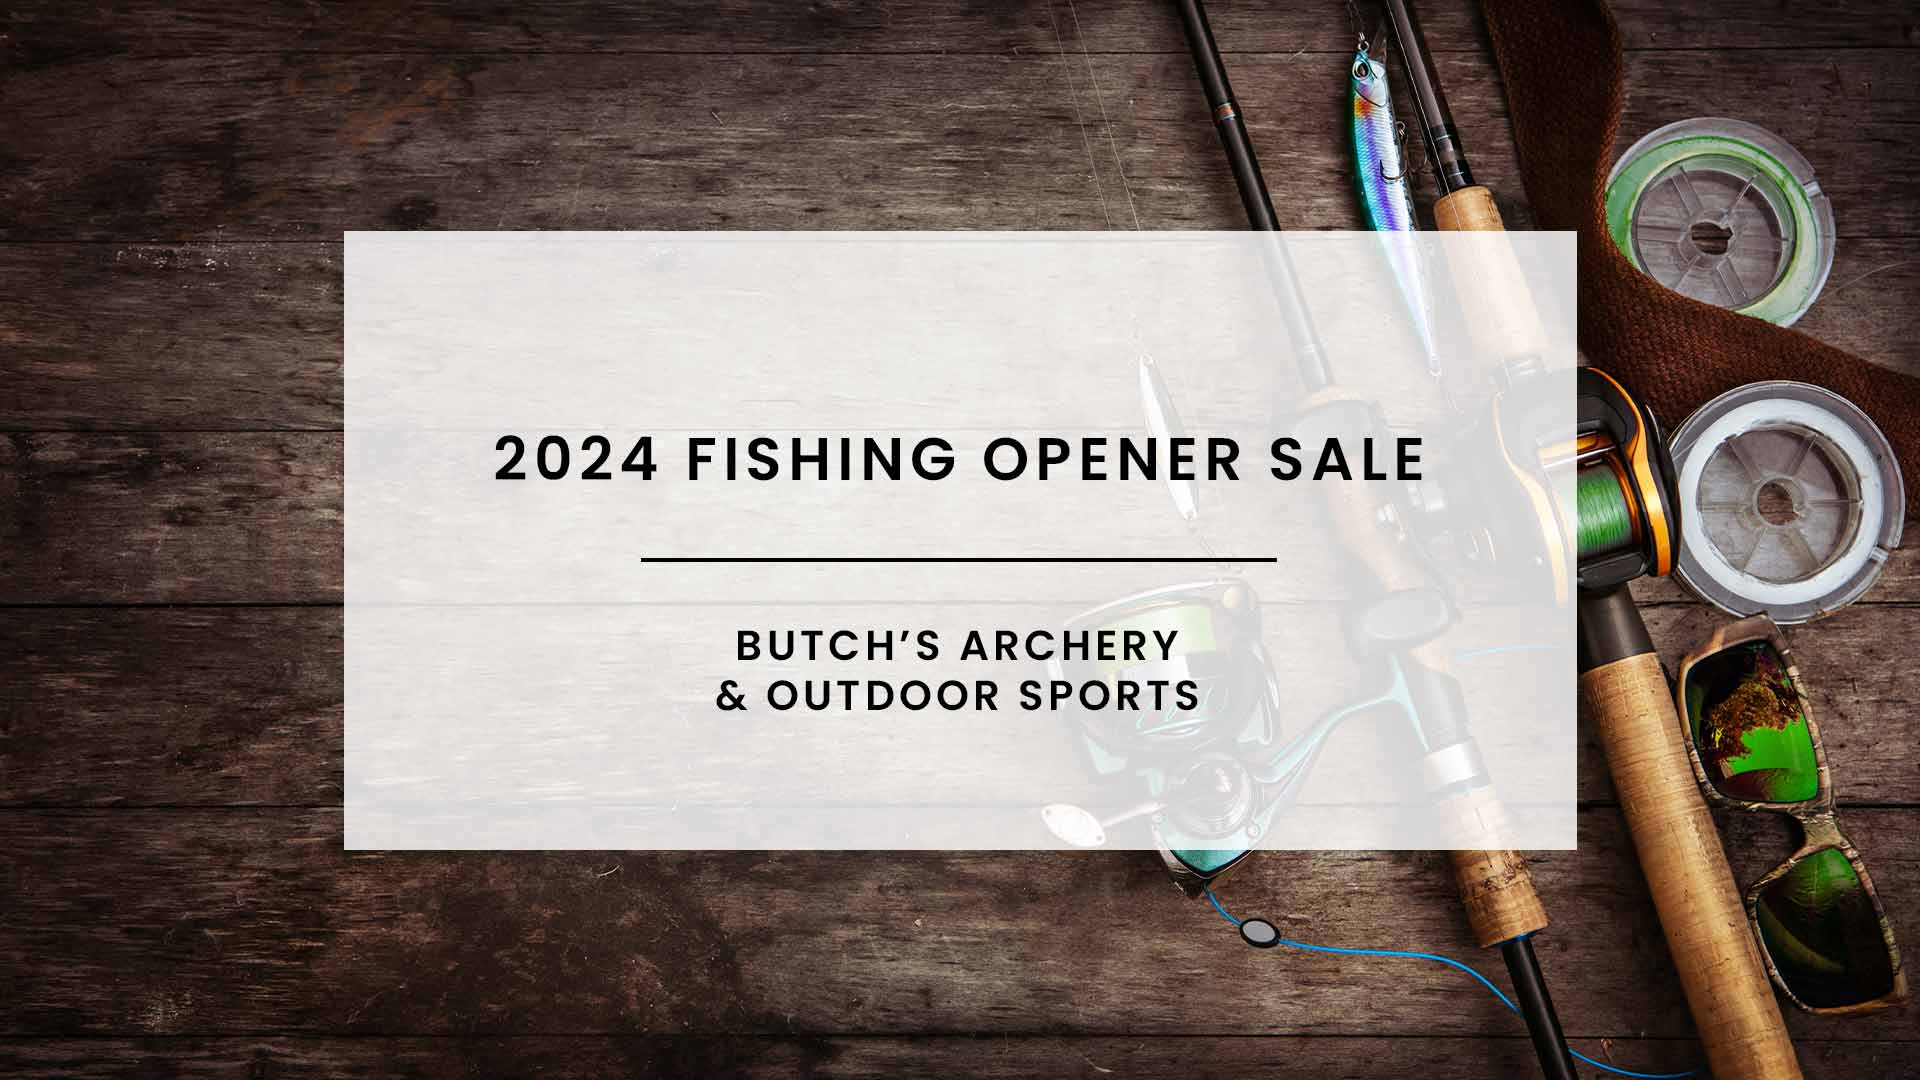 2024 Fishing Opener Sale | Butch's Archery & Outdoor Sports